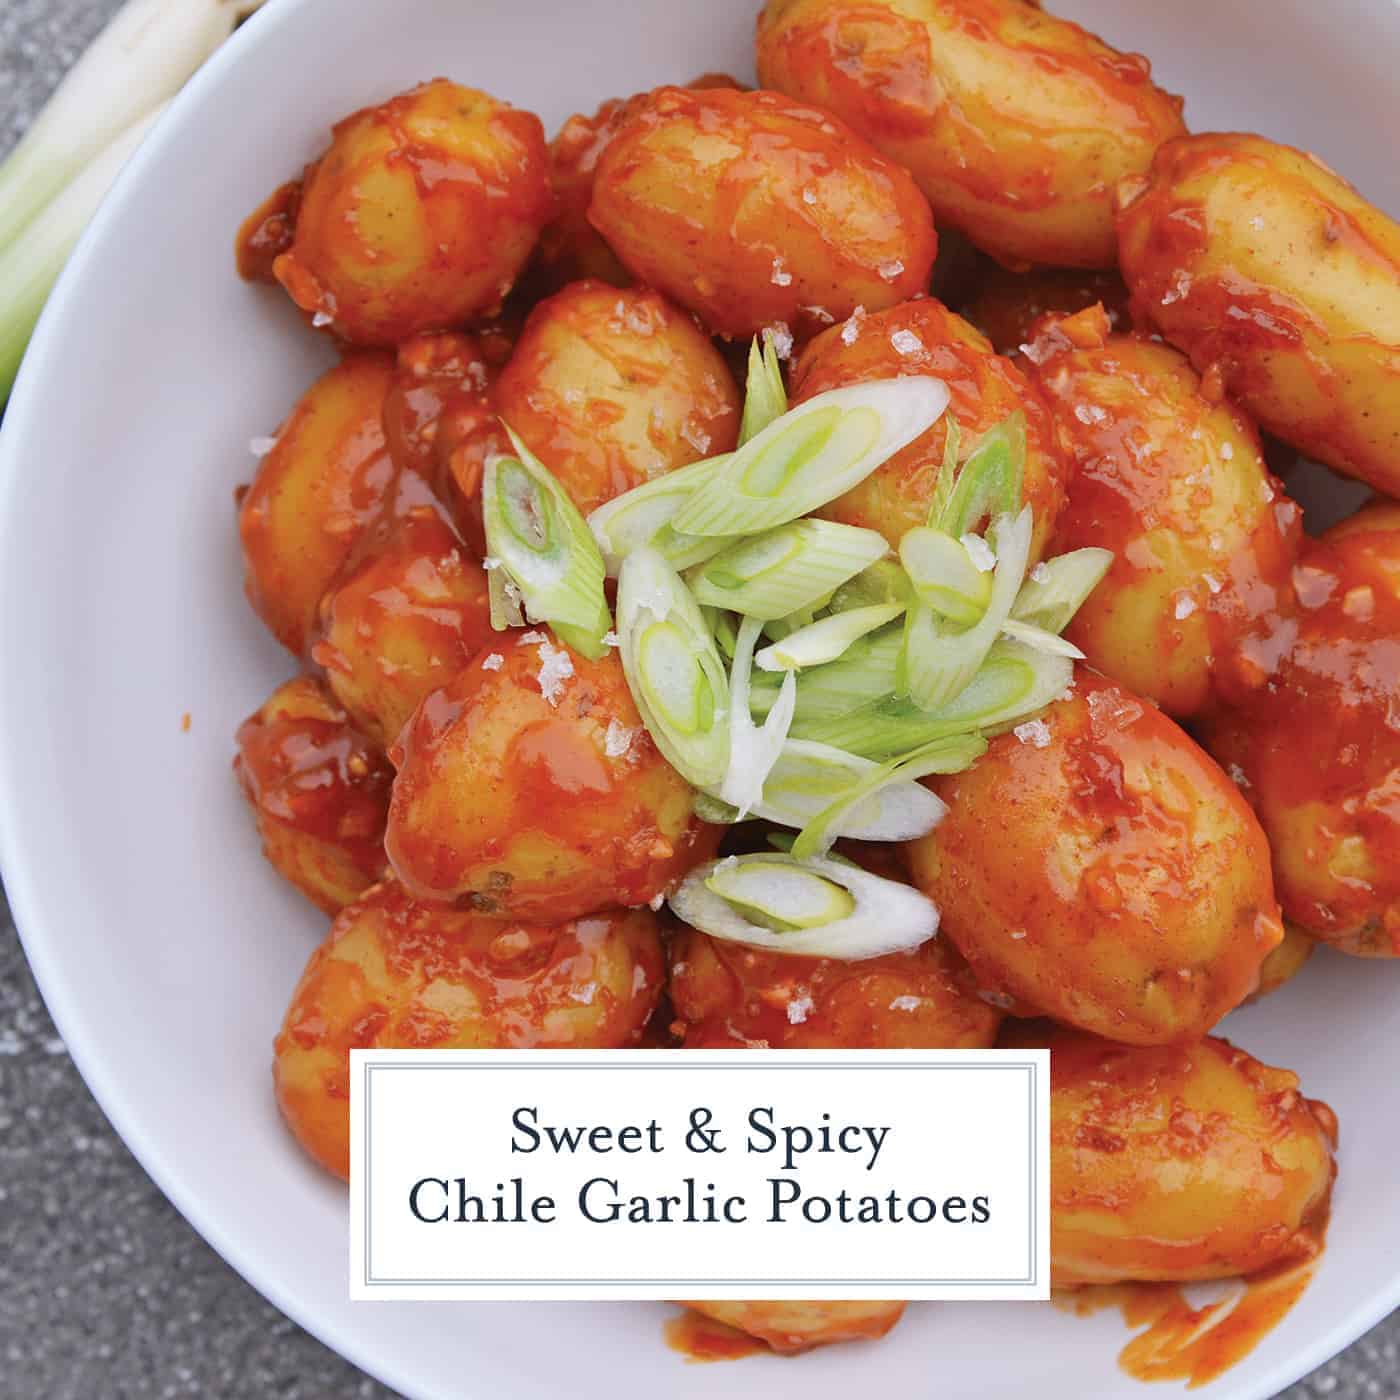 Chile Garlic Potatoes are an easy potato side dish using baby potatoes in a sweet and spicy sauce. #potatosidedish www.savoryexperiments.com 